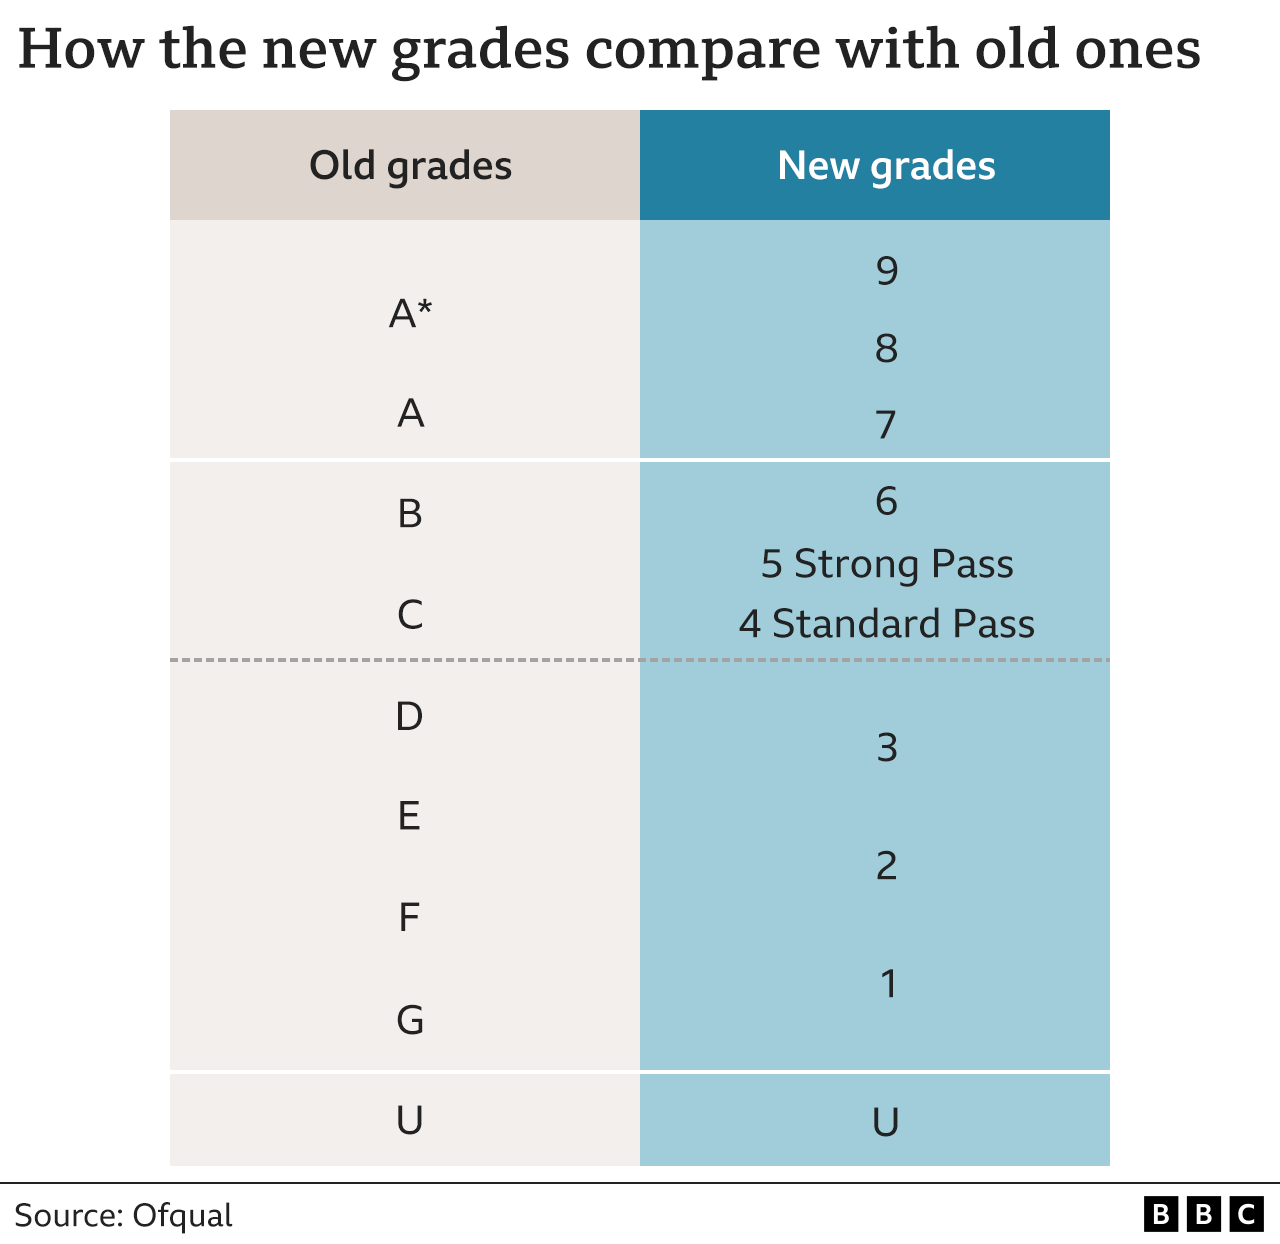 Graphics showing the new GCSE grading system uses numbers